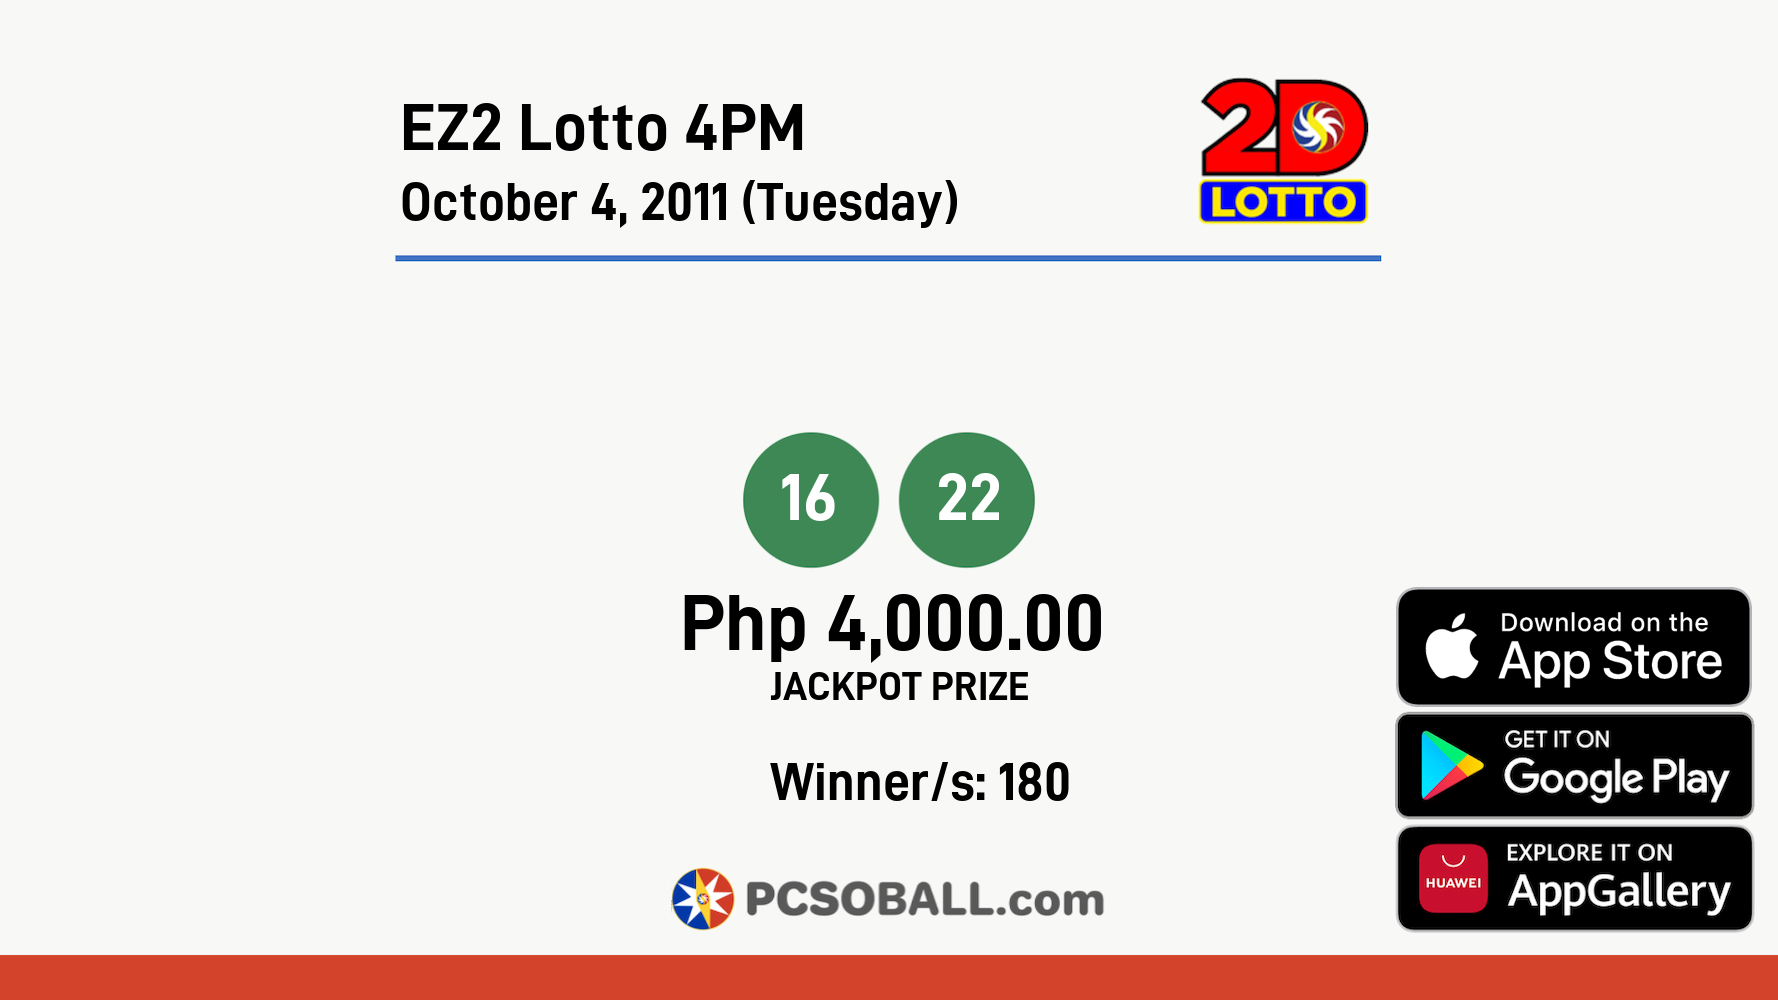 EZ2 Lotto 4PM October 4, 2011 (Tuesday) Result